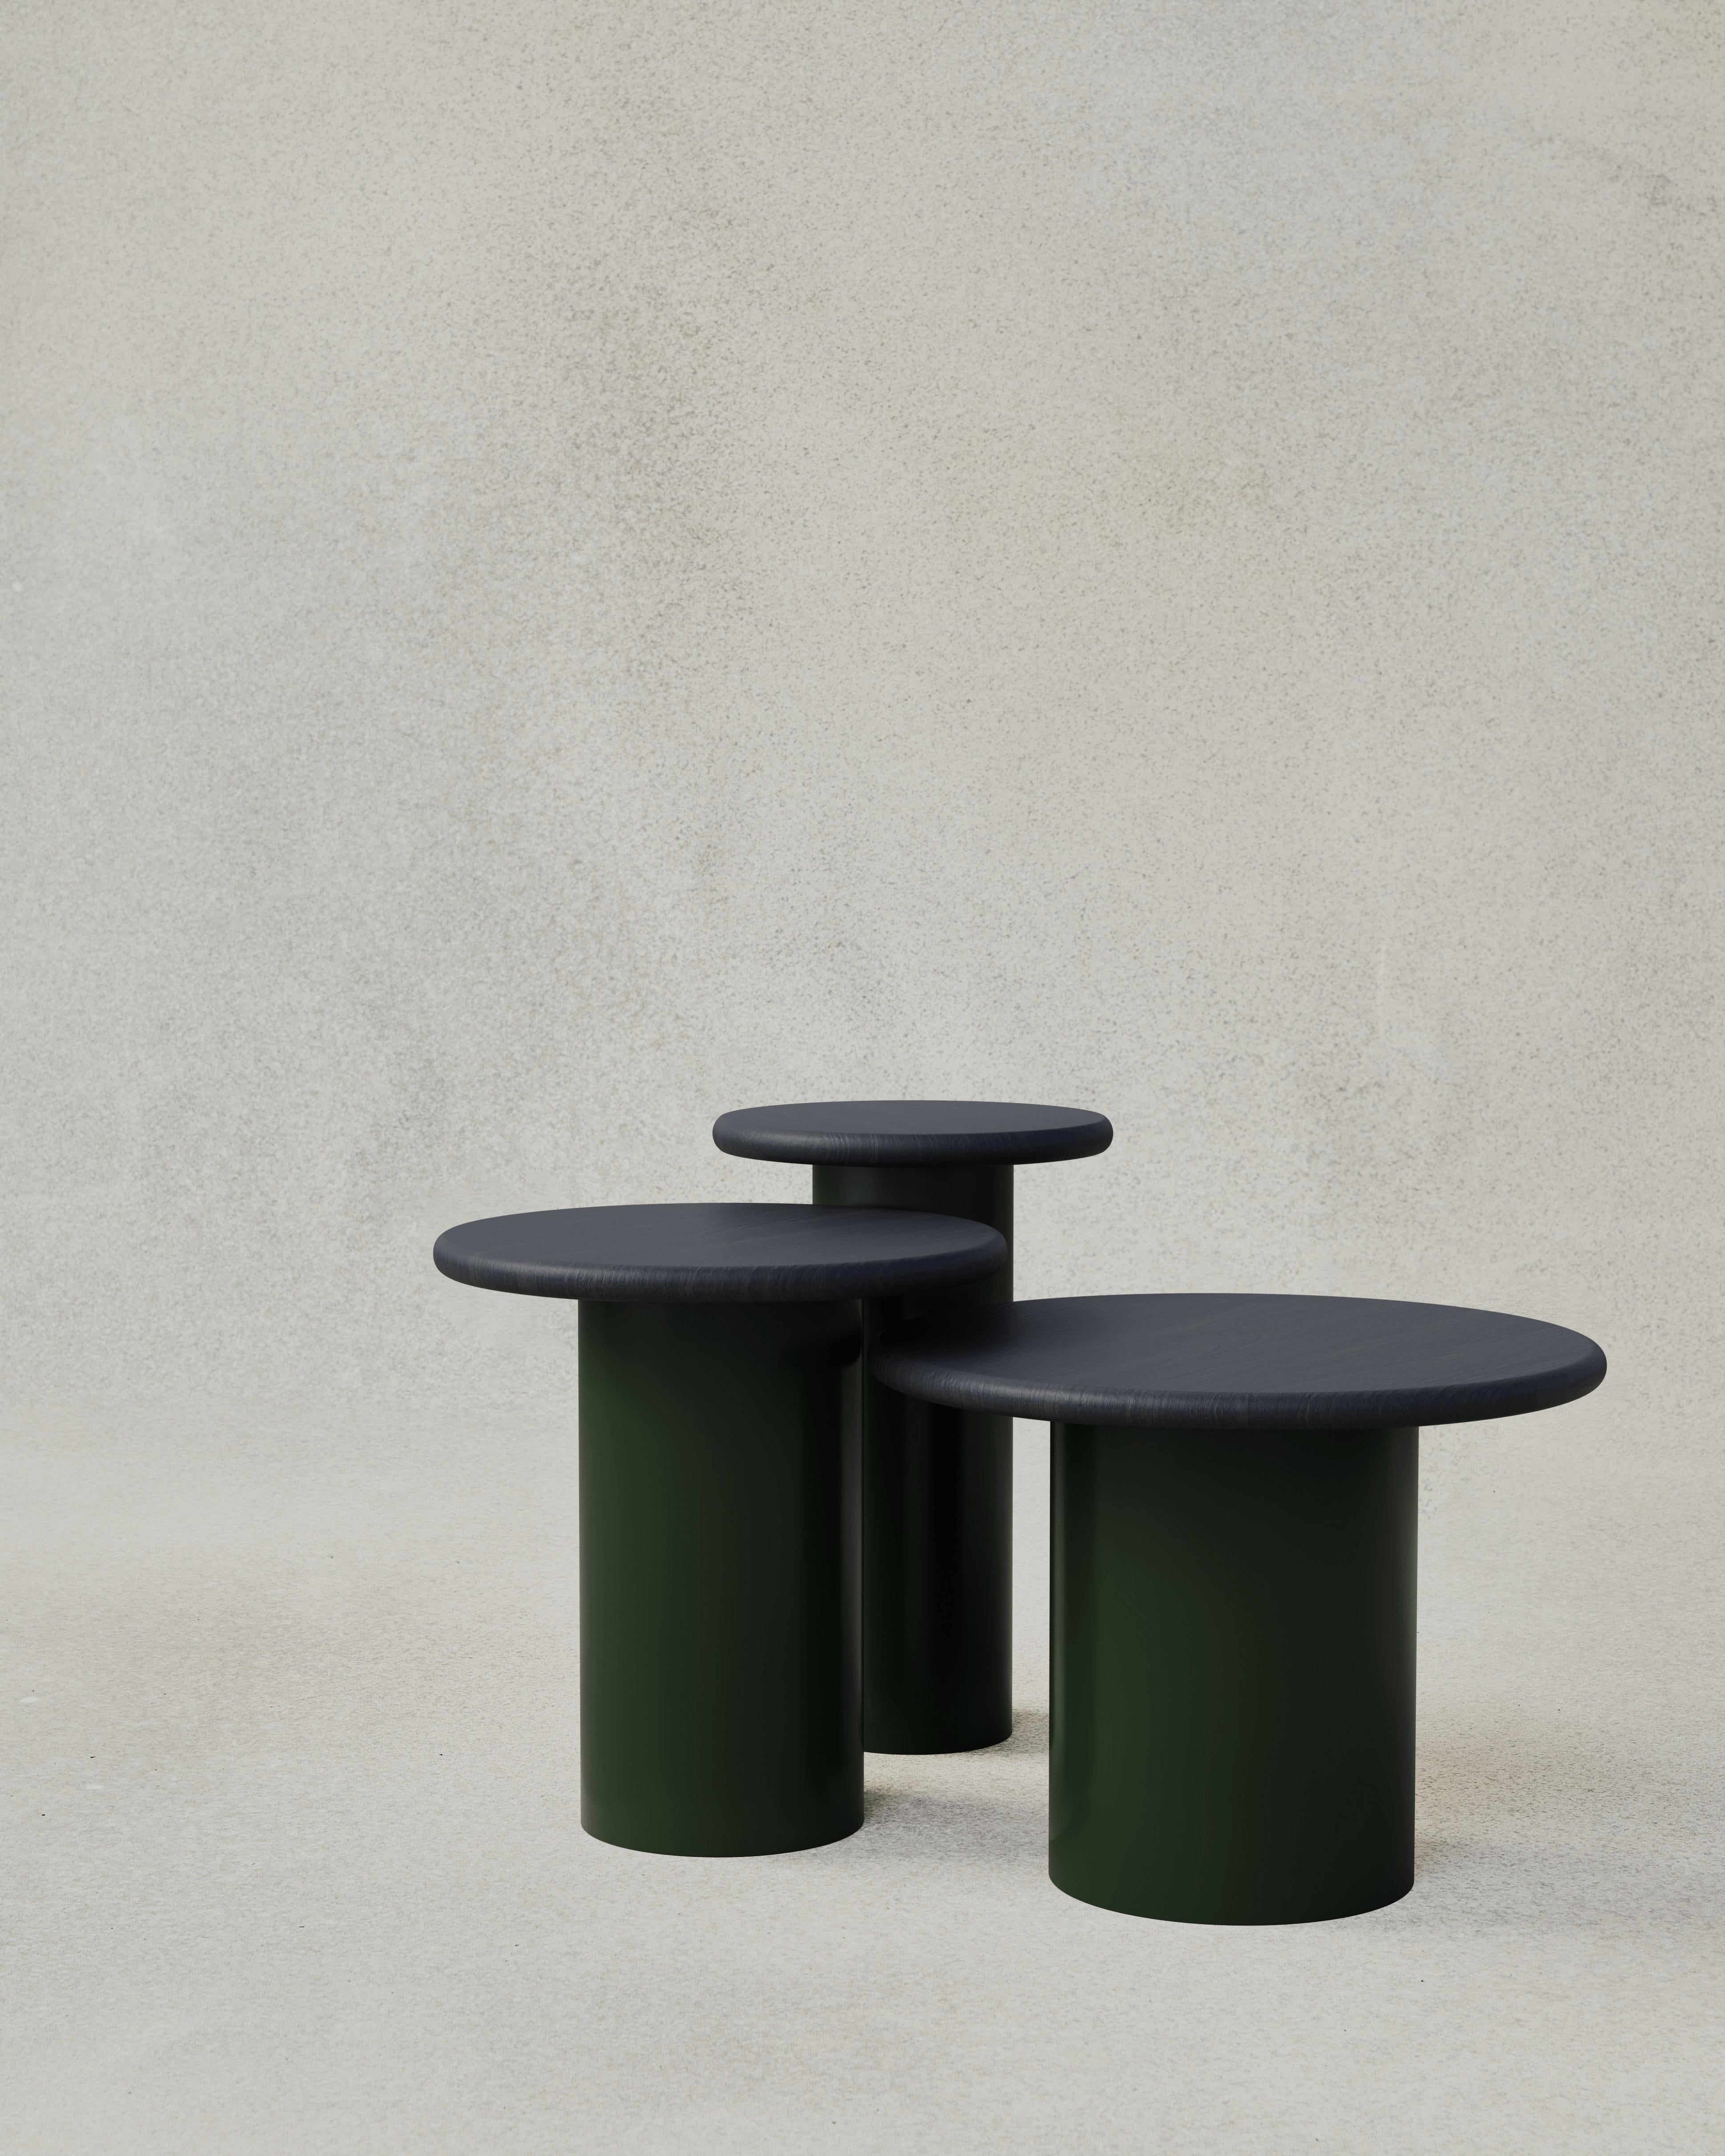 With their circular profiles, varying proportions and potential to be nested, these versatile tables evoke the pattern of raindrops in a POOL of water when placed together.

Bought as a set of 300, 400, 500, we add a 10% discount

Tops: Black